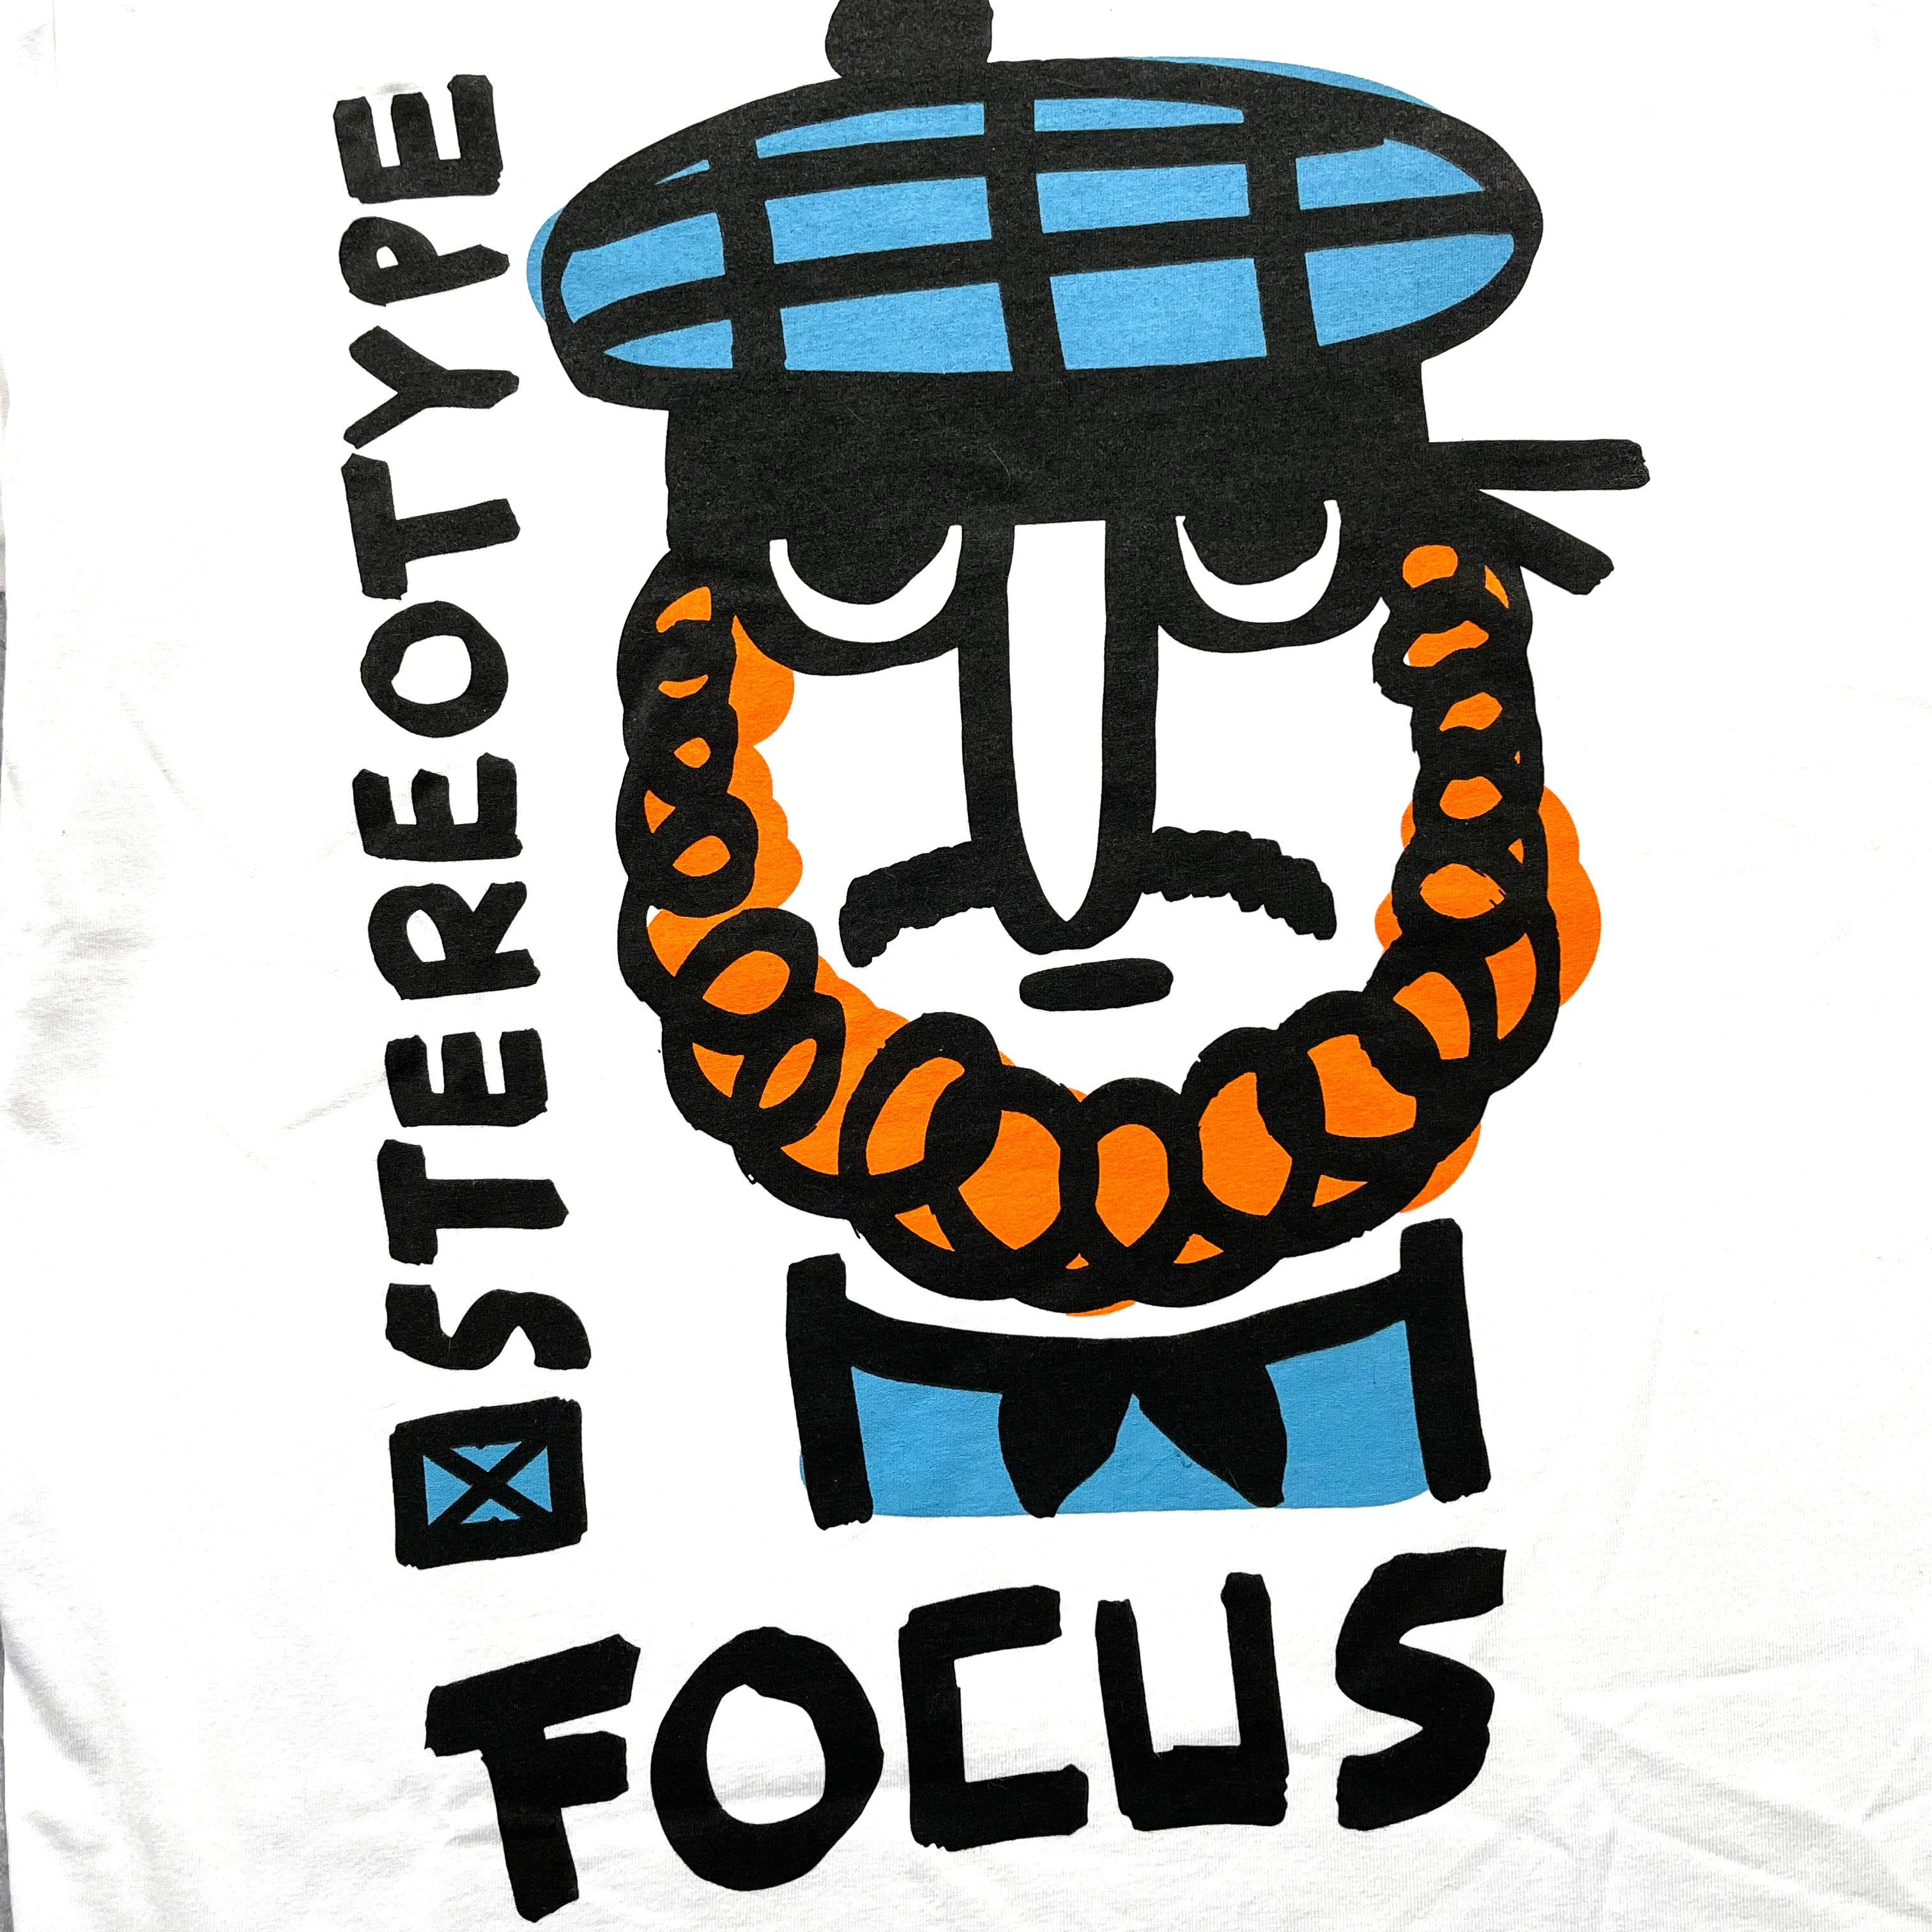 Focus Stereotype T-shirt - White